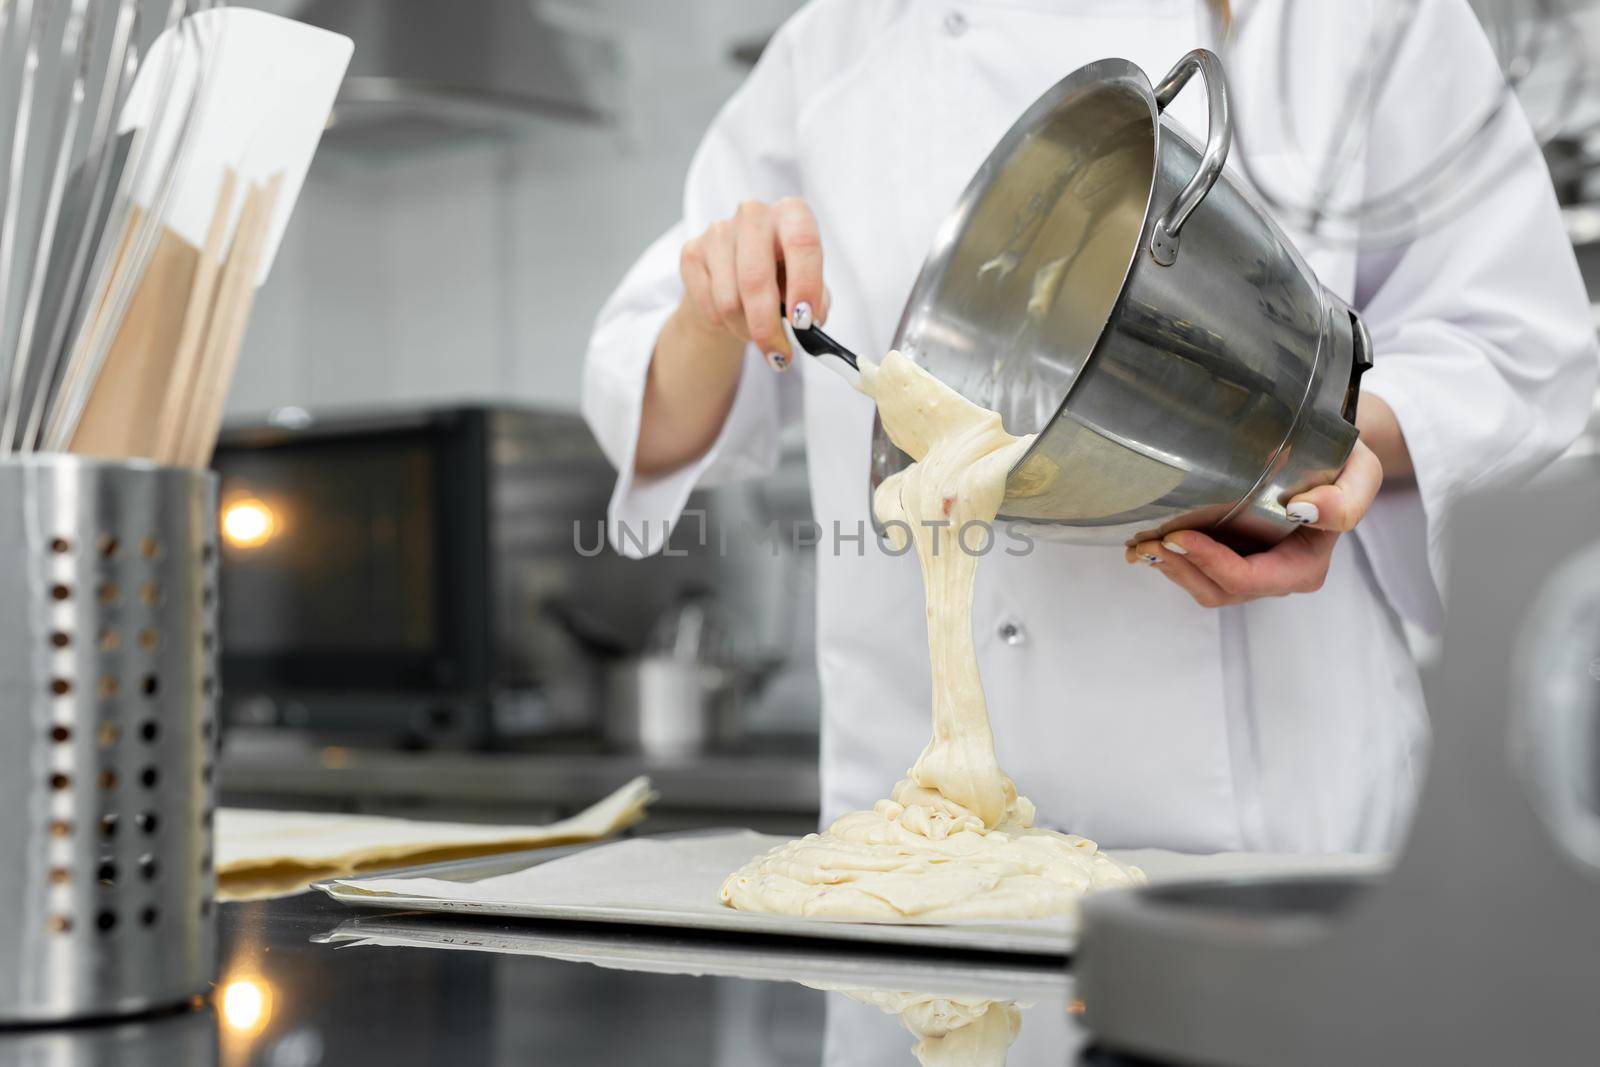 Pastry chef pours the biscuit on the baking parchment.